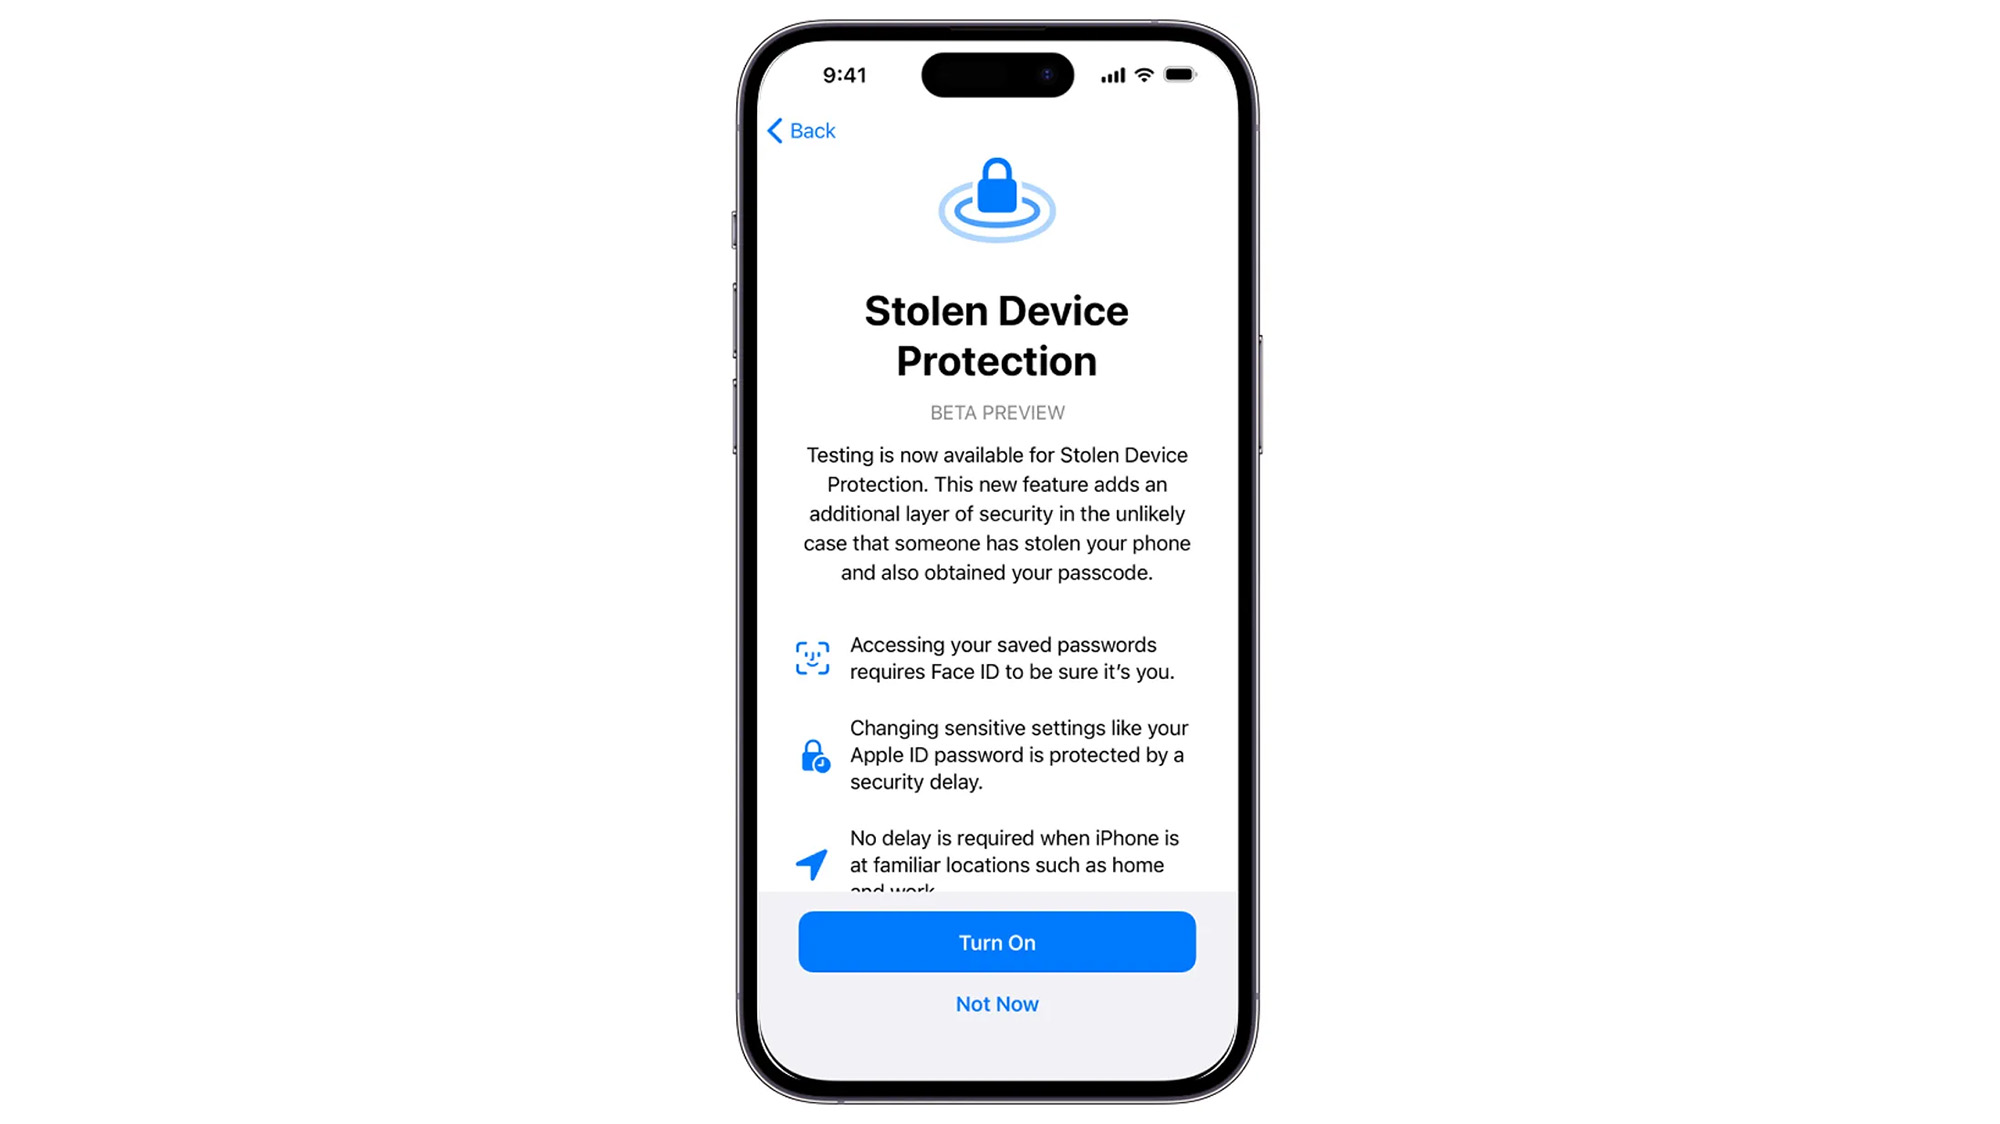 iPhone Stolen Device Protection